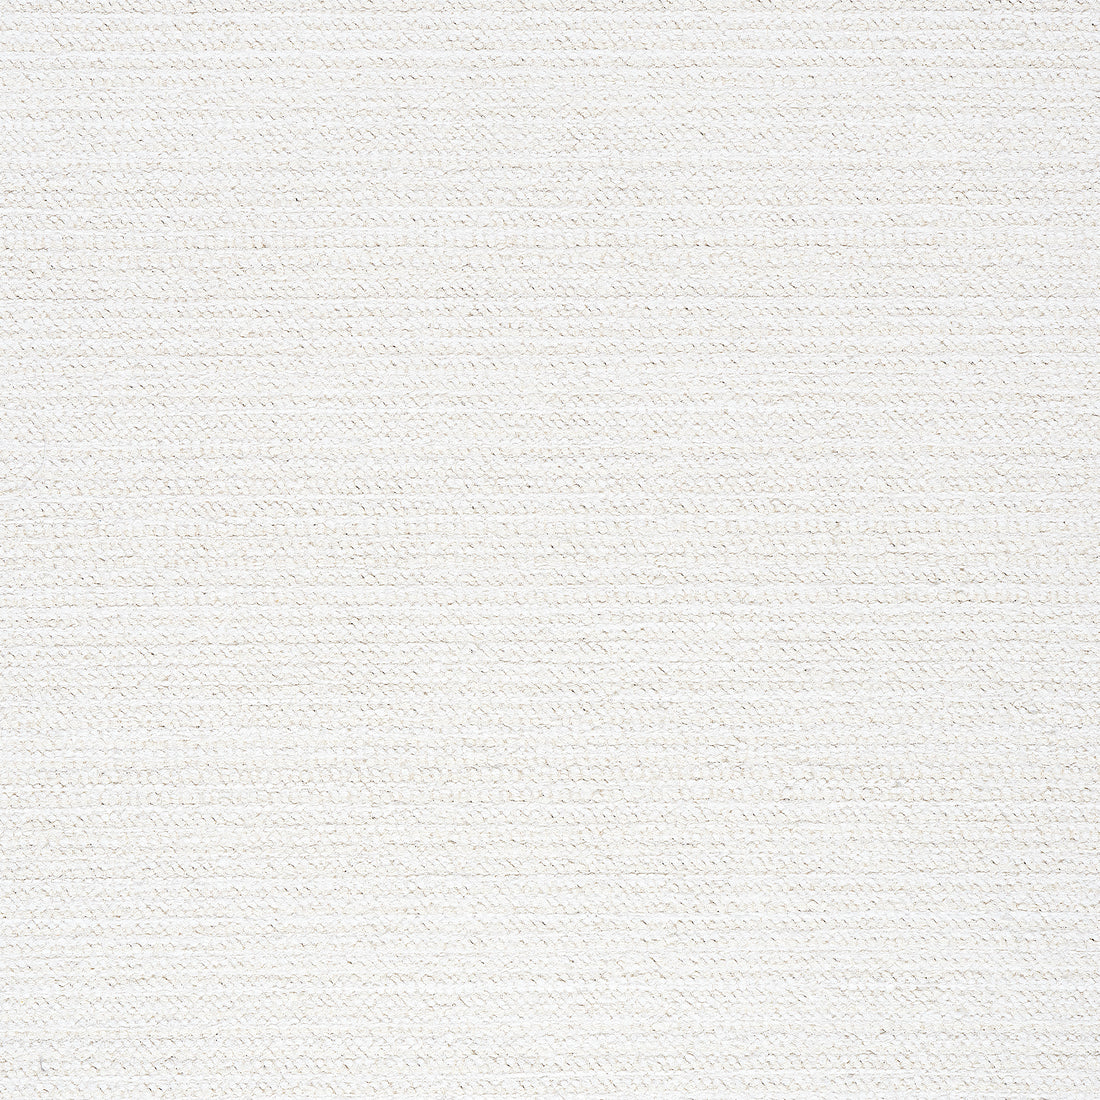 Strata fabric in bone color - pattern number W78343 - by Thibaut in the  Sierra collection